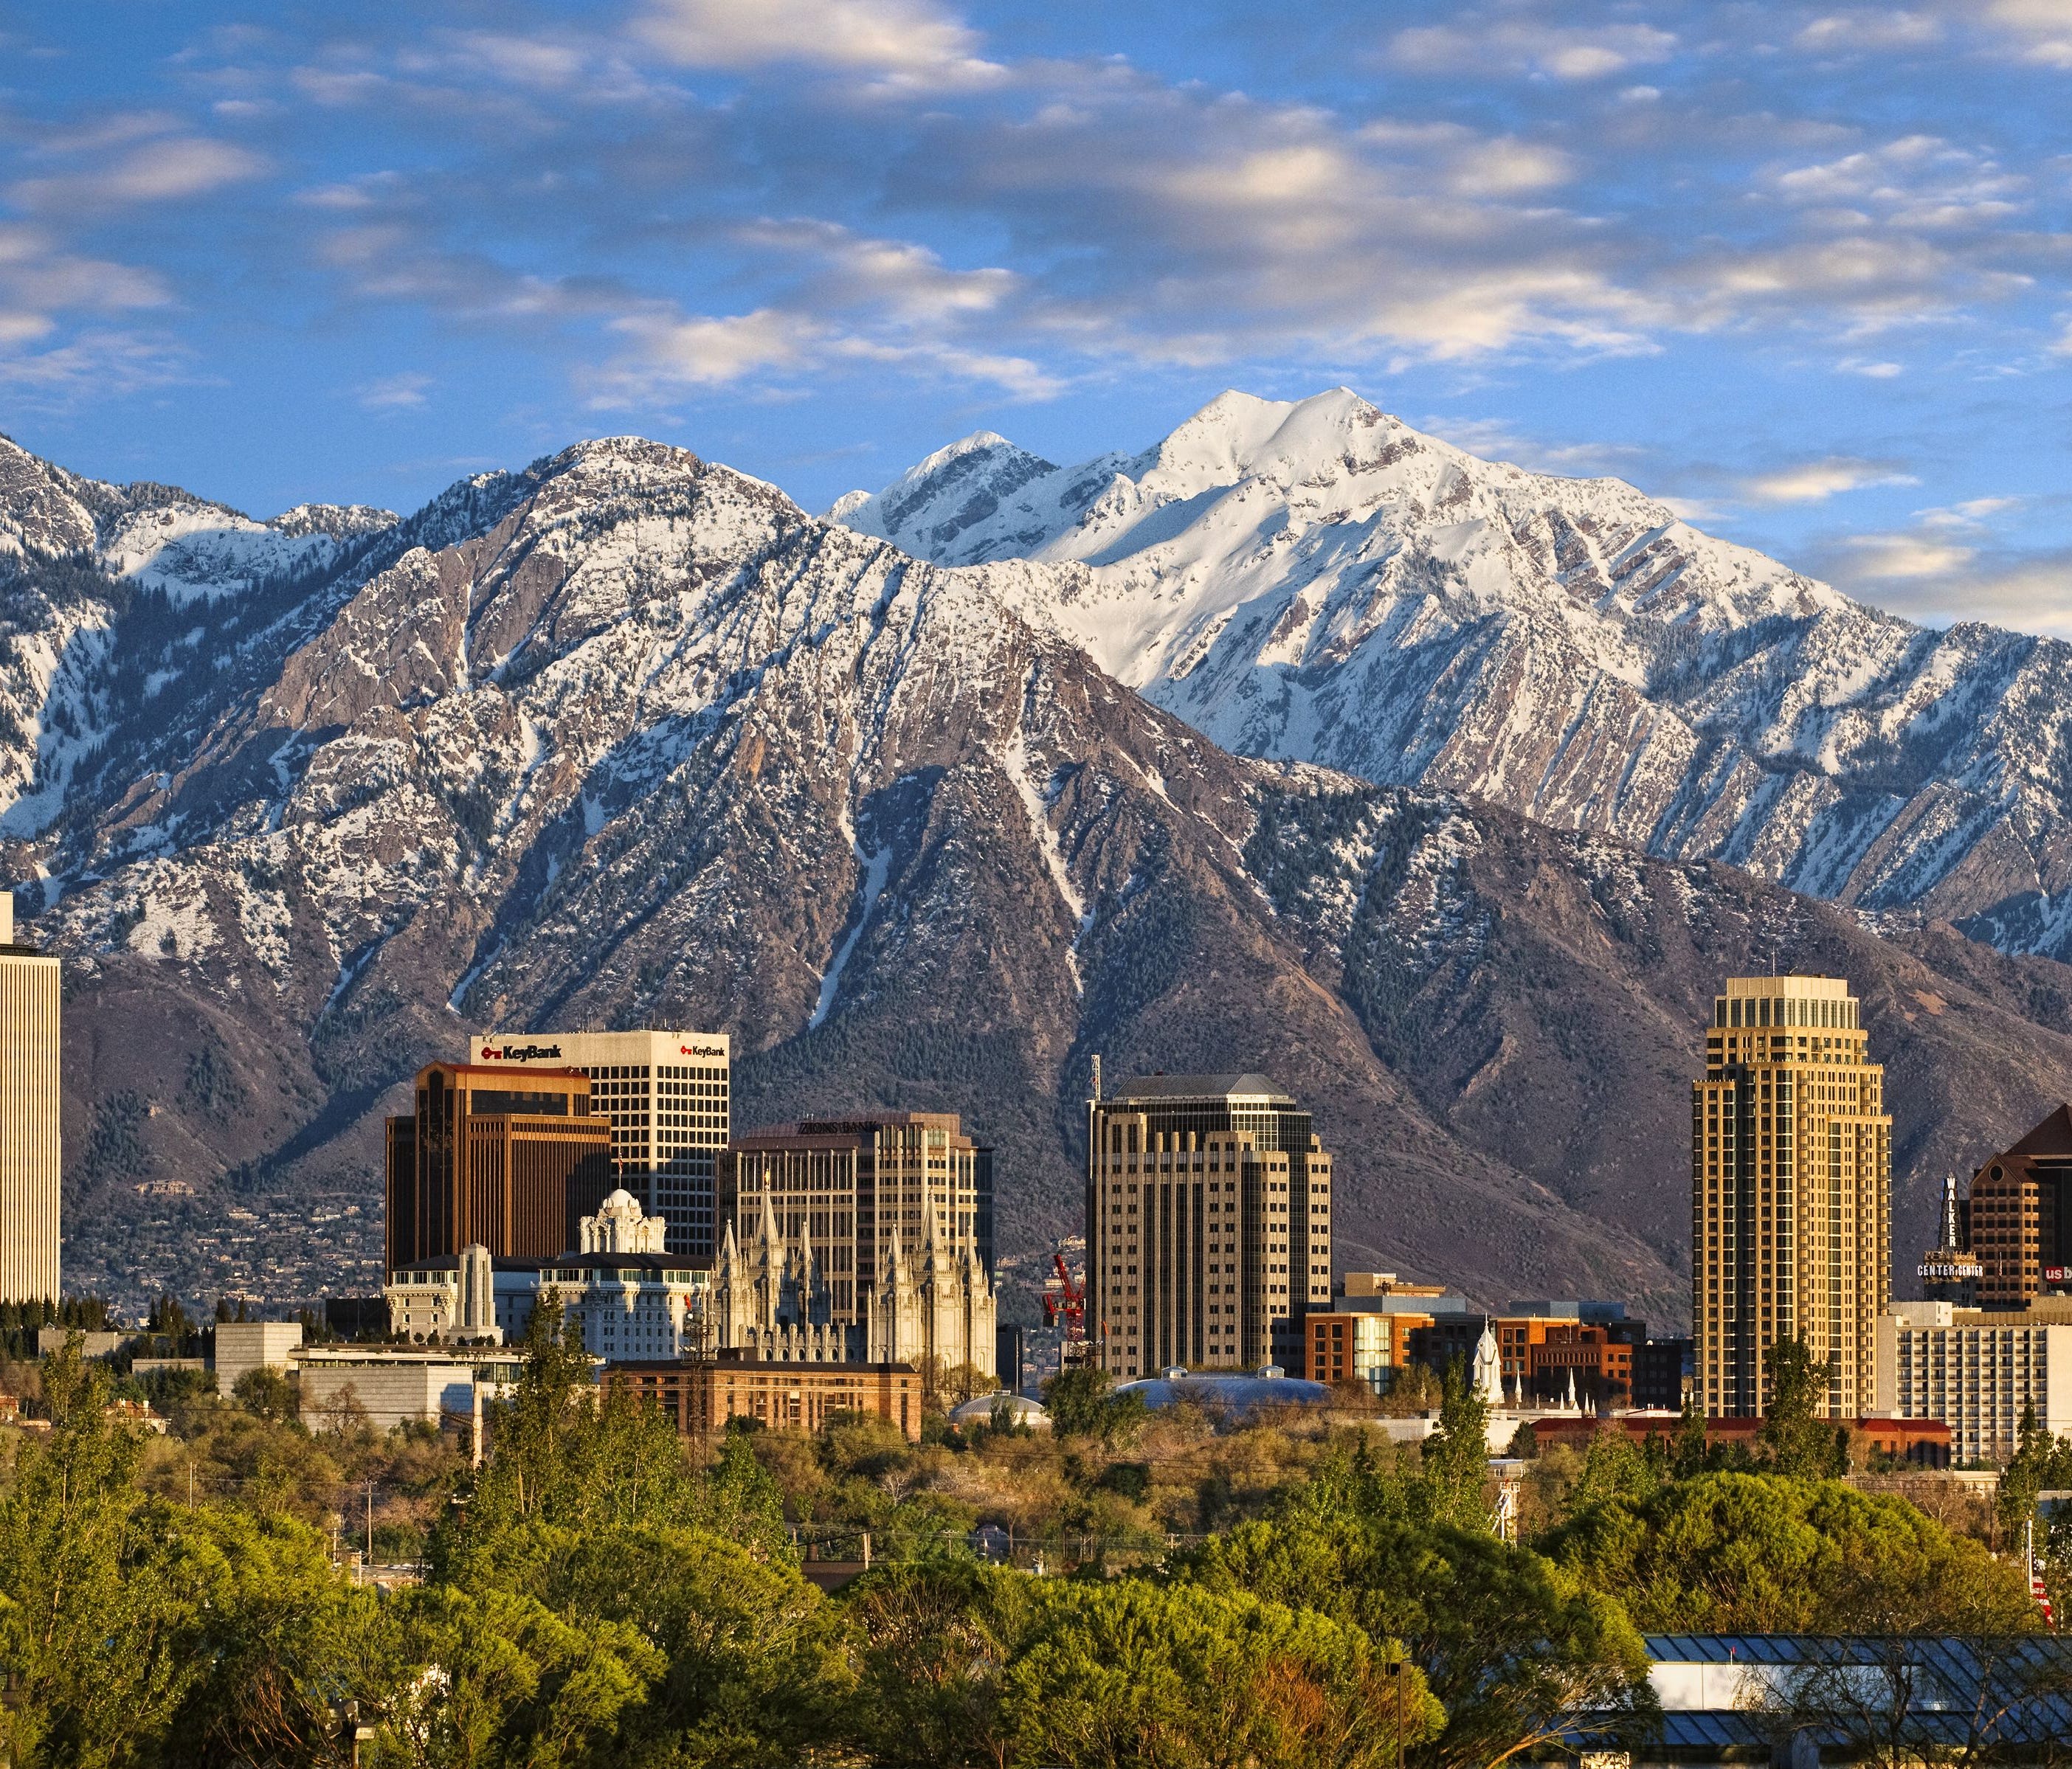 Skyline of downtown Salt Lake City with the Towering Wasatch Mountain range in the background